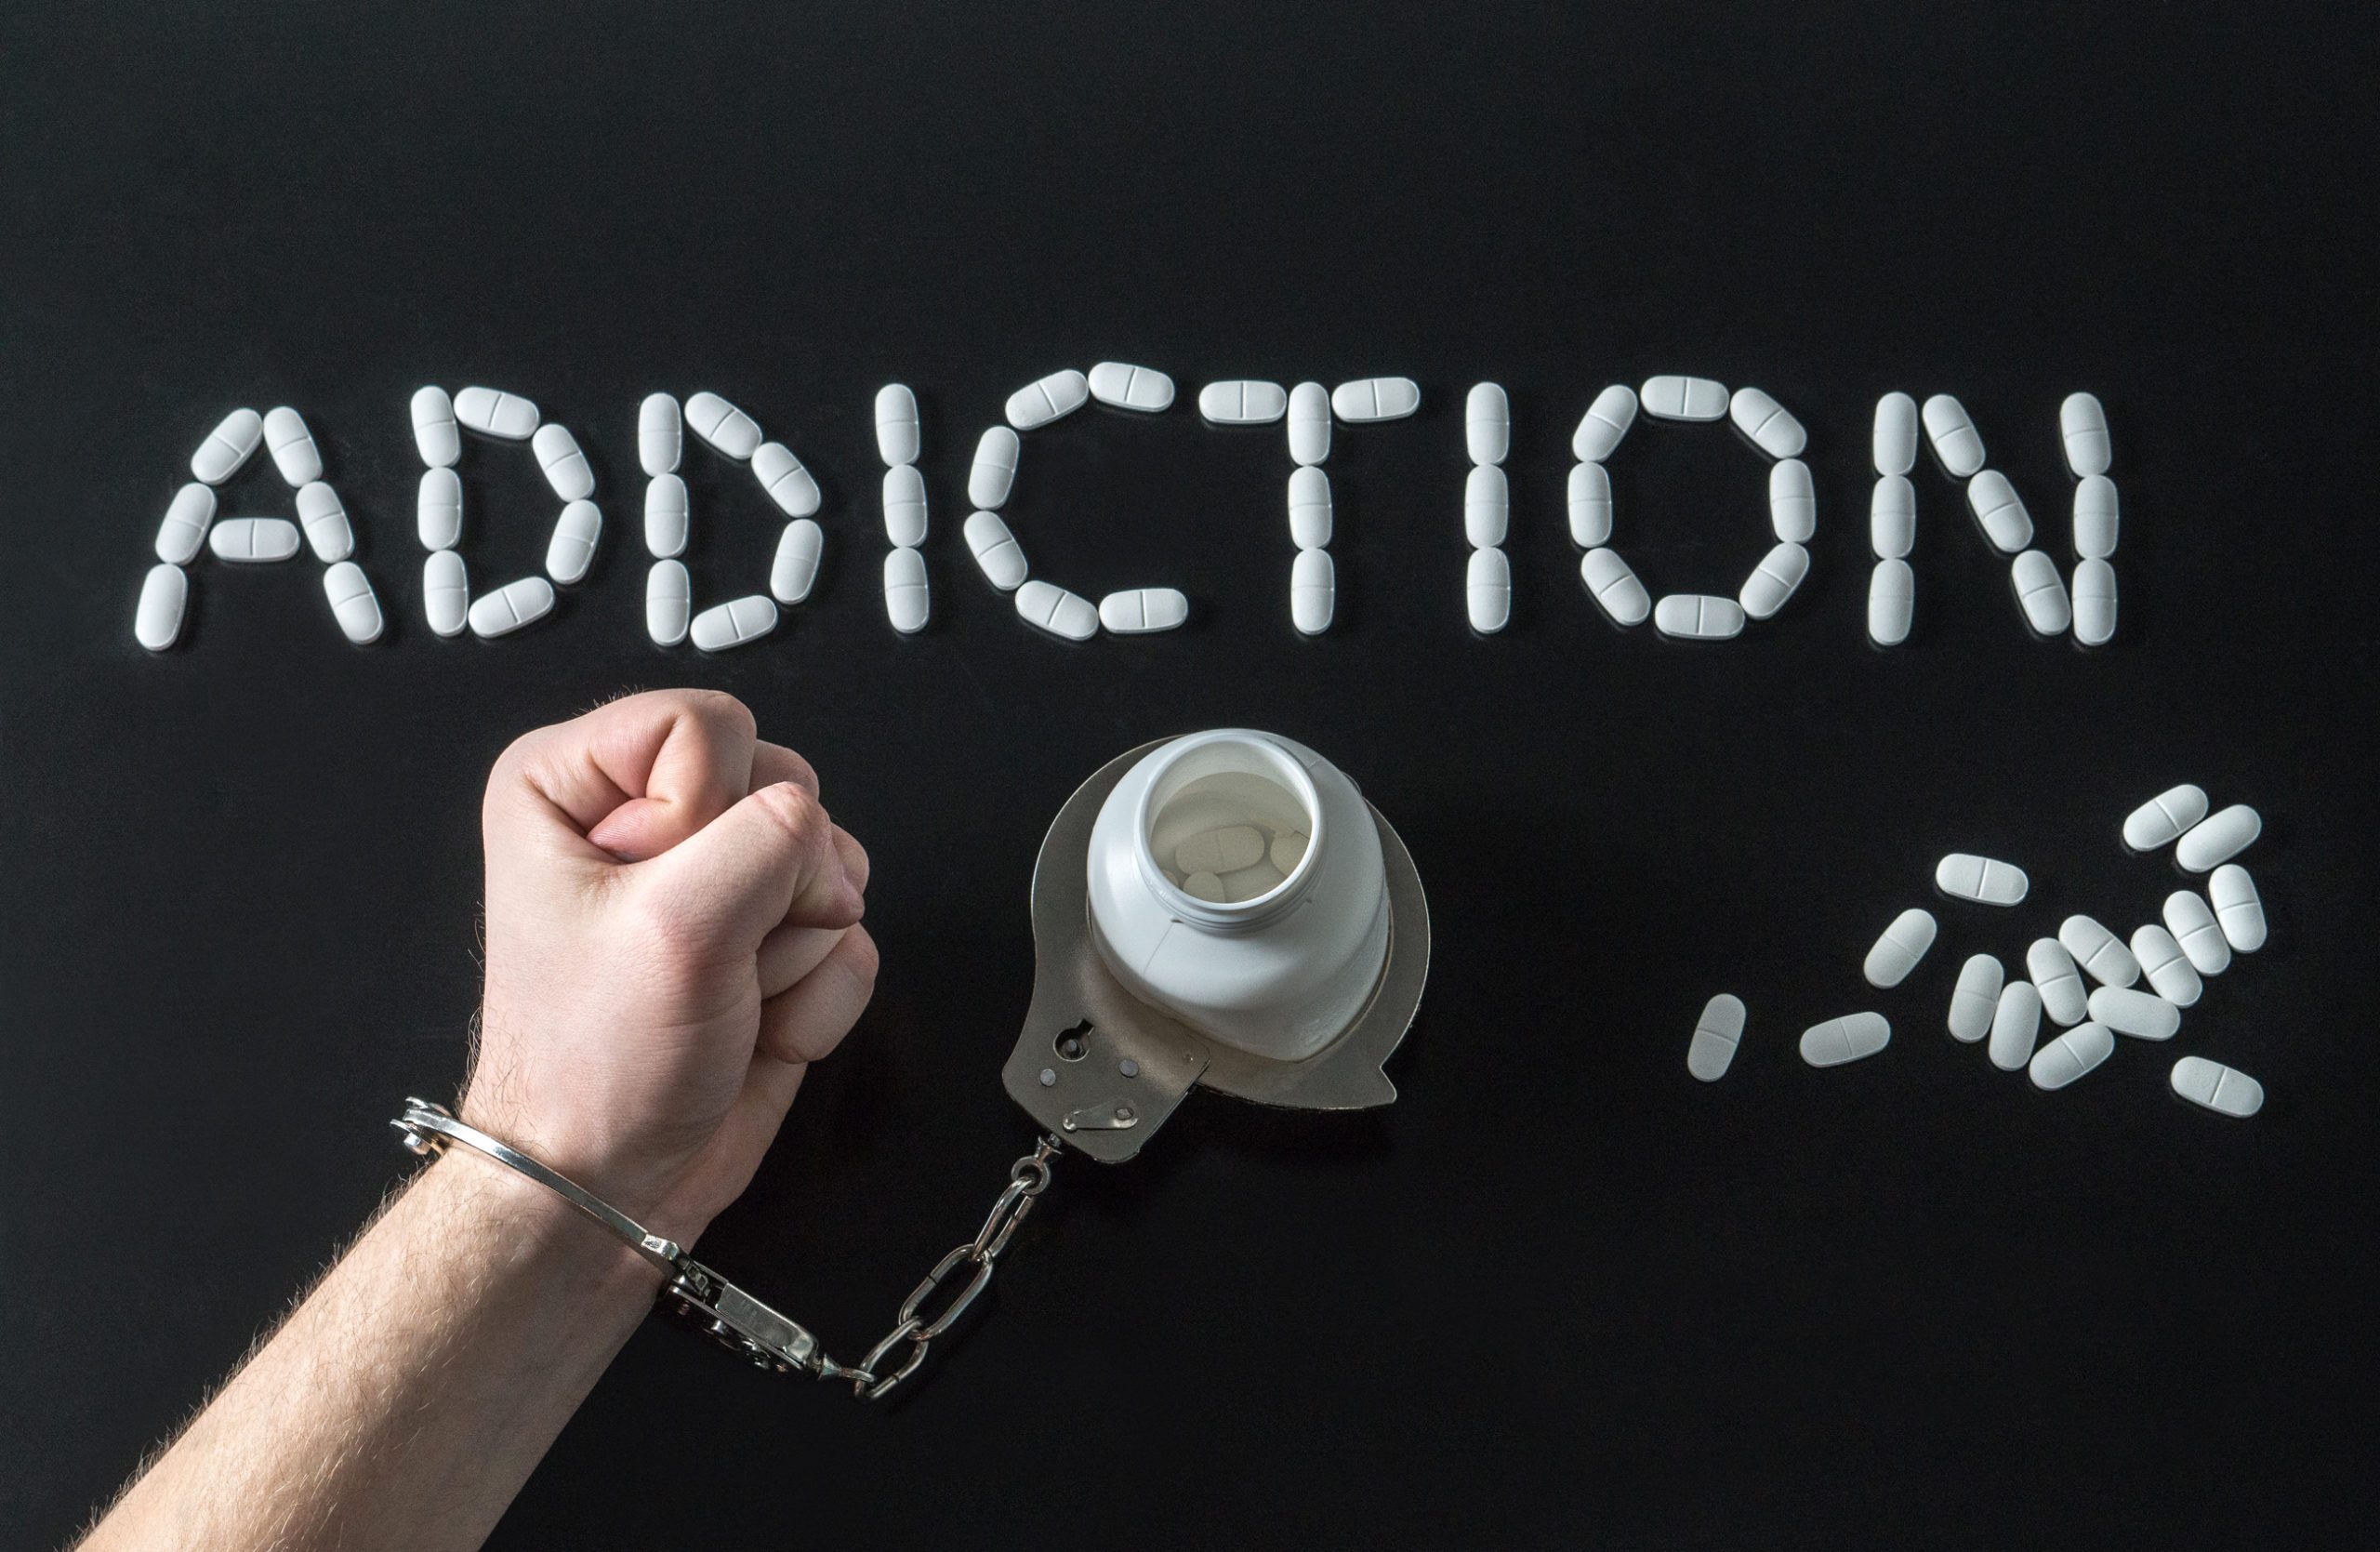 Researchers find clue to preventing addiction relapse